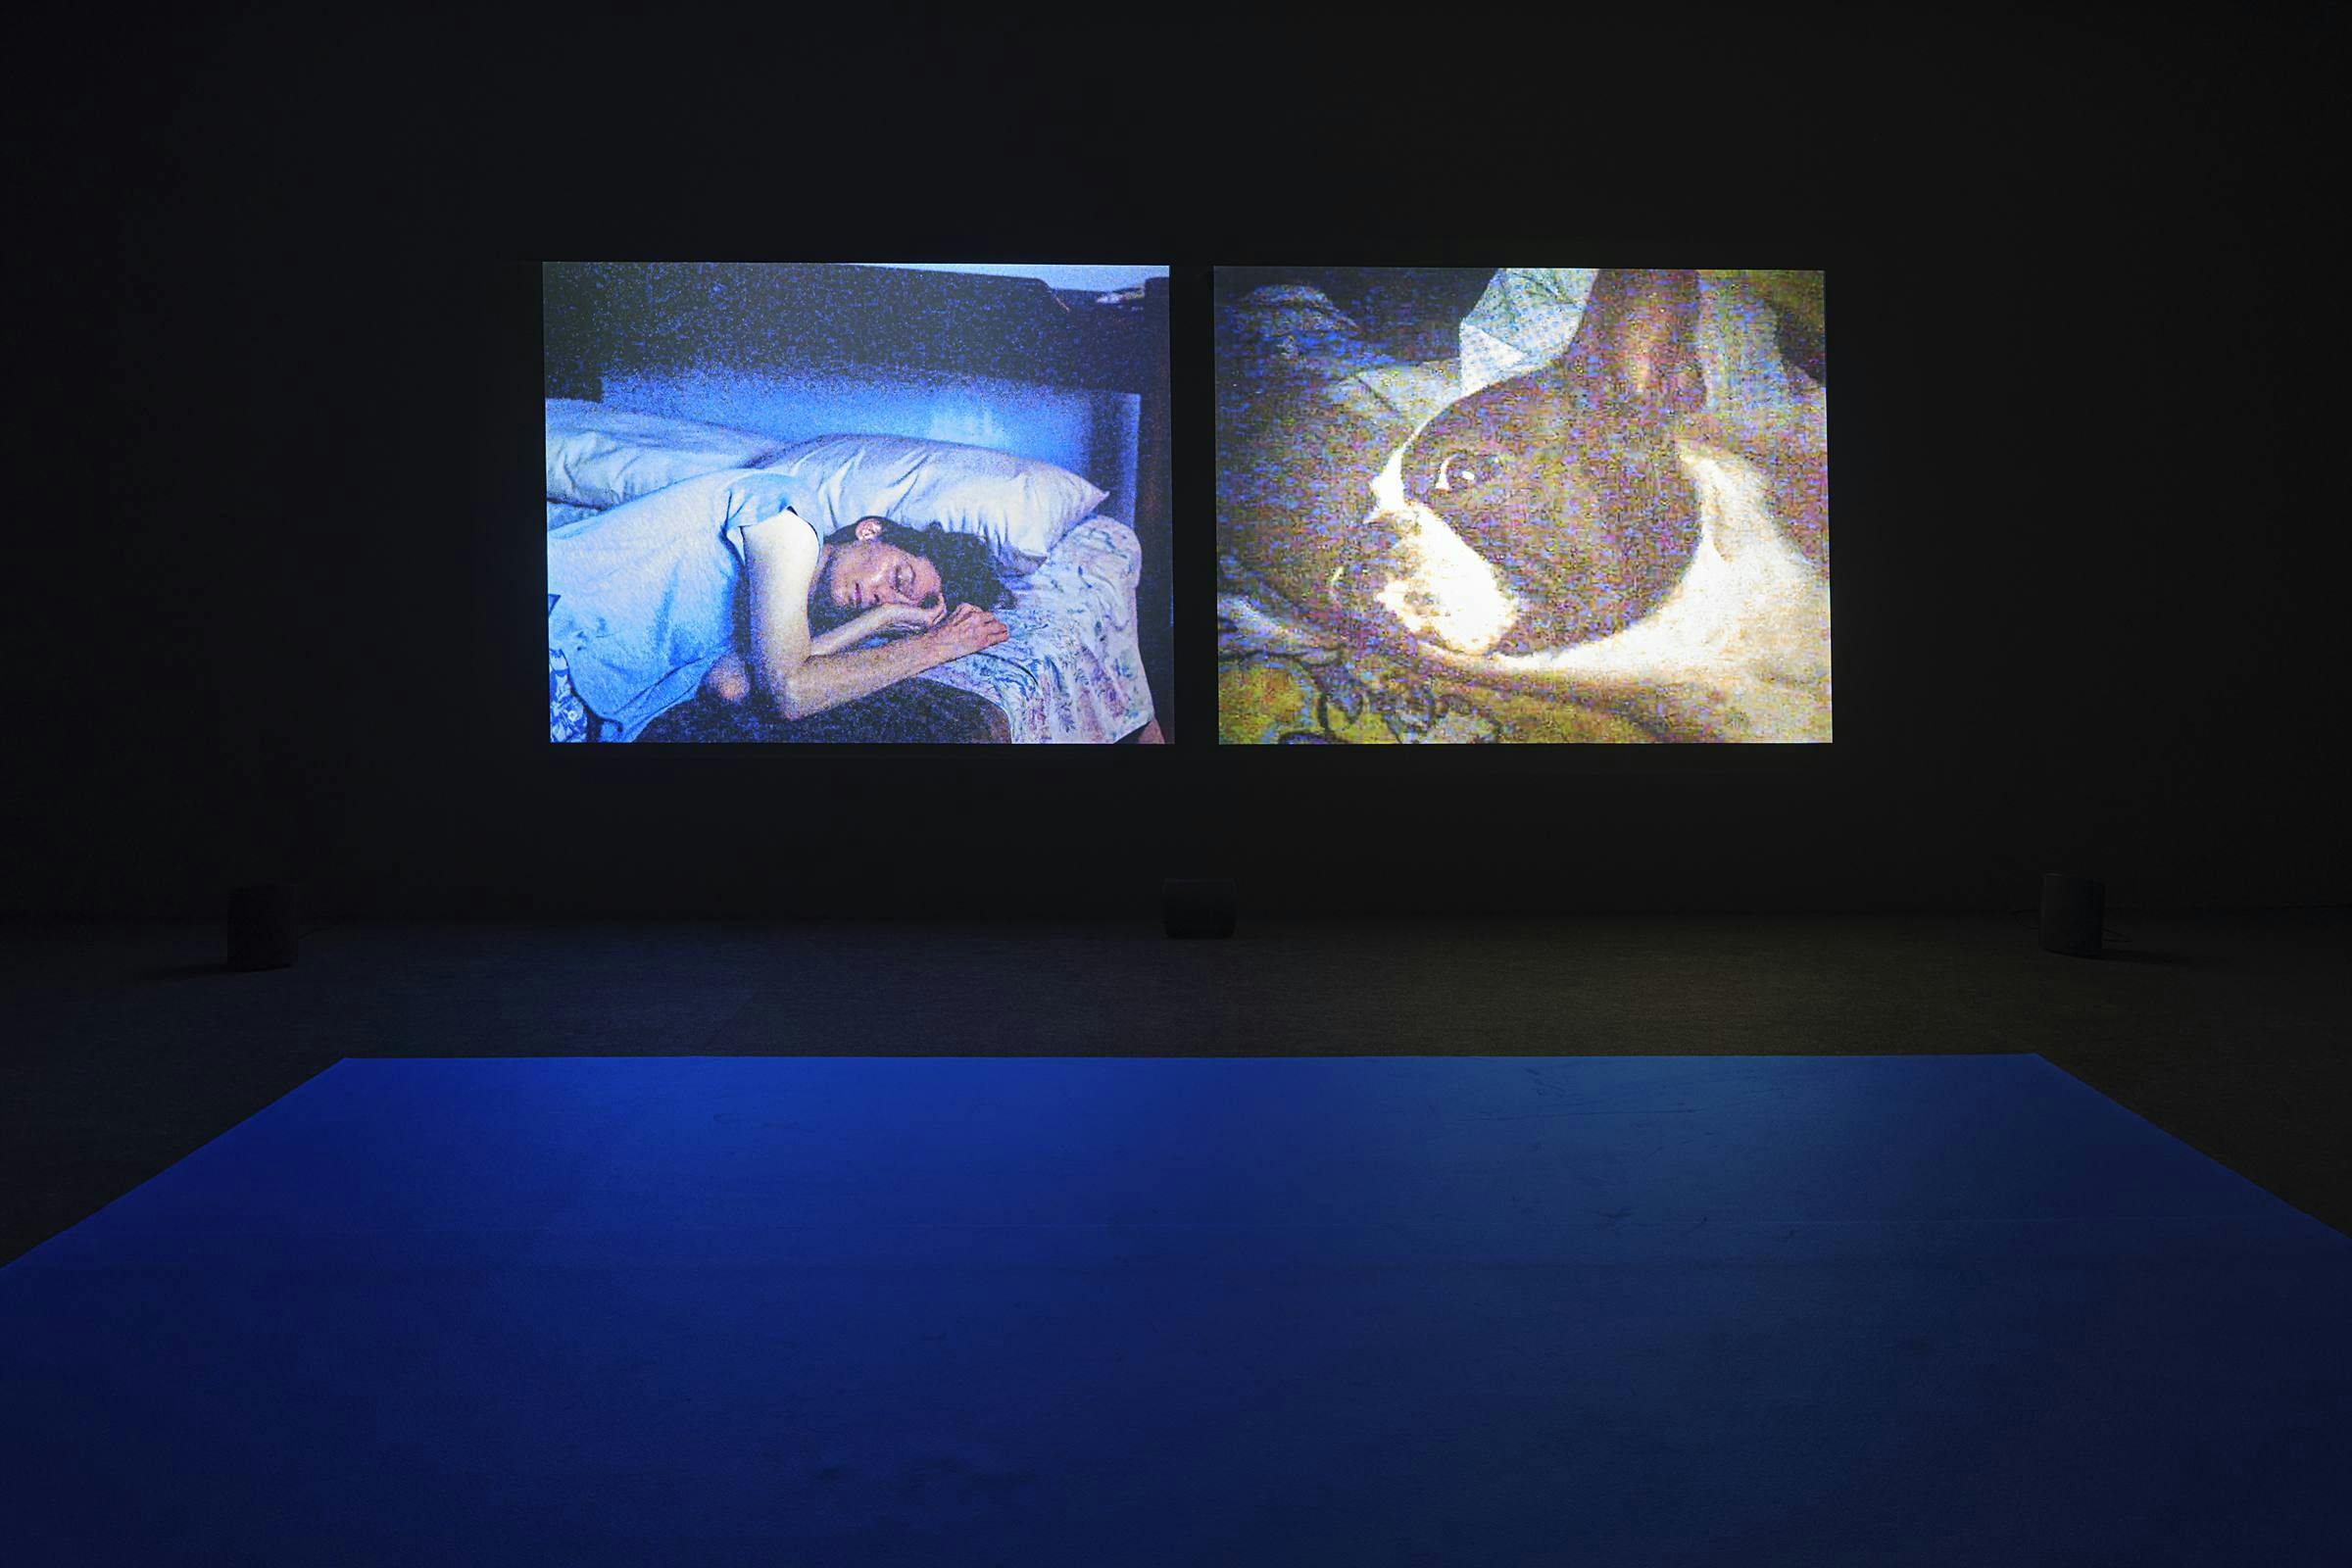 an image of the work Durmiente & async projected in a darkened space. The carpet is blue.